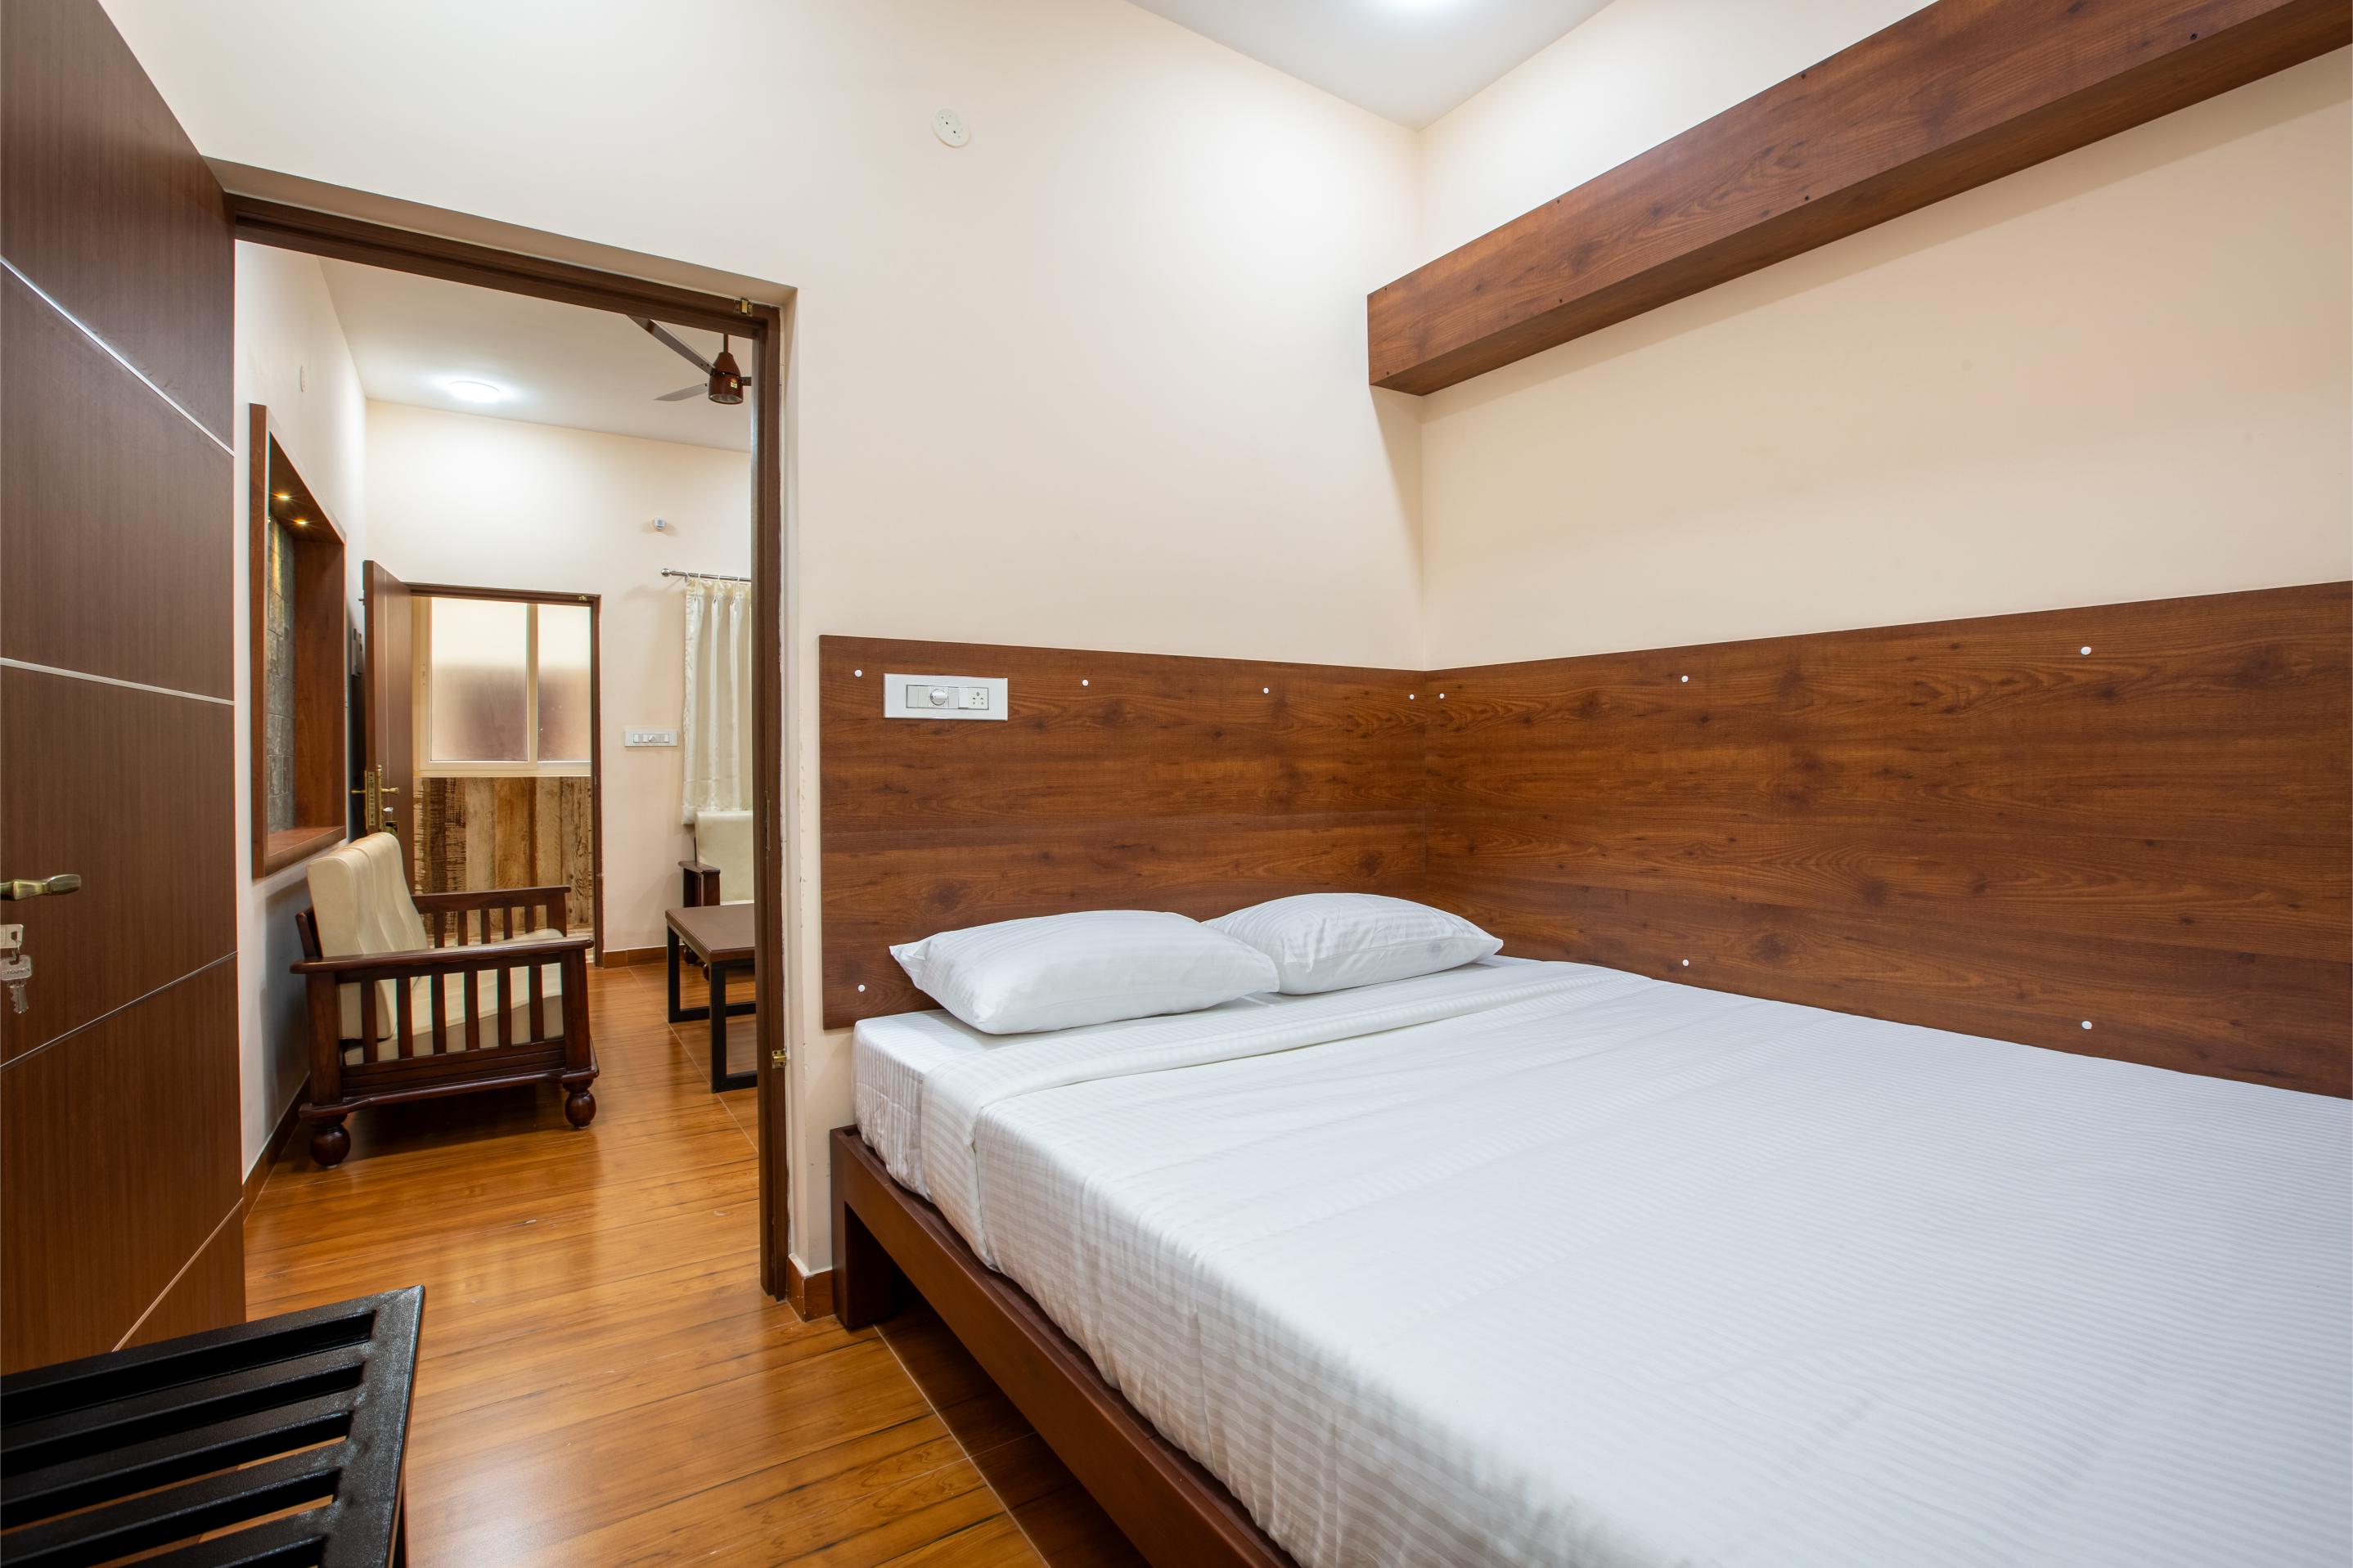 Best Place to Stay in Peelamedu  Extended Stay in Coimbator - Tamil Nadu - Coimbatore ID1568340